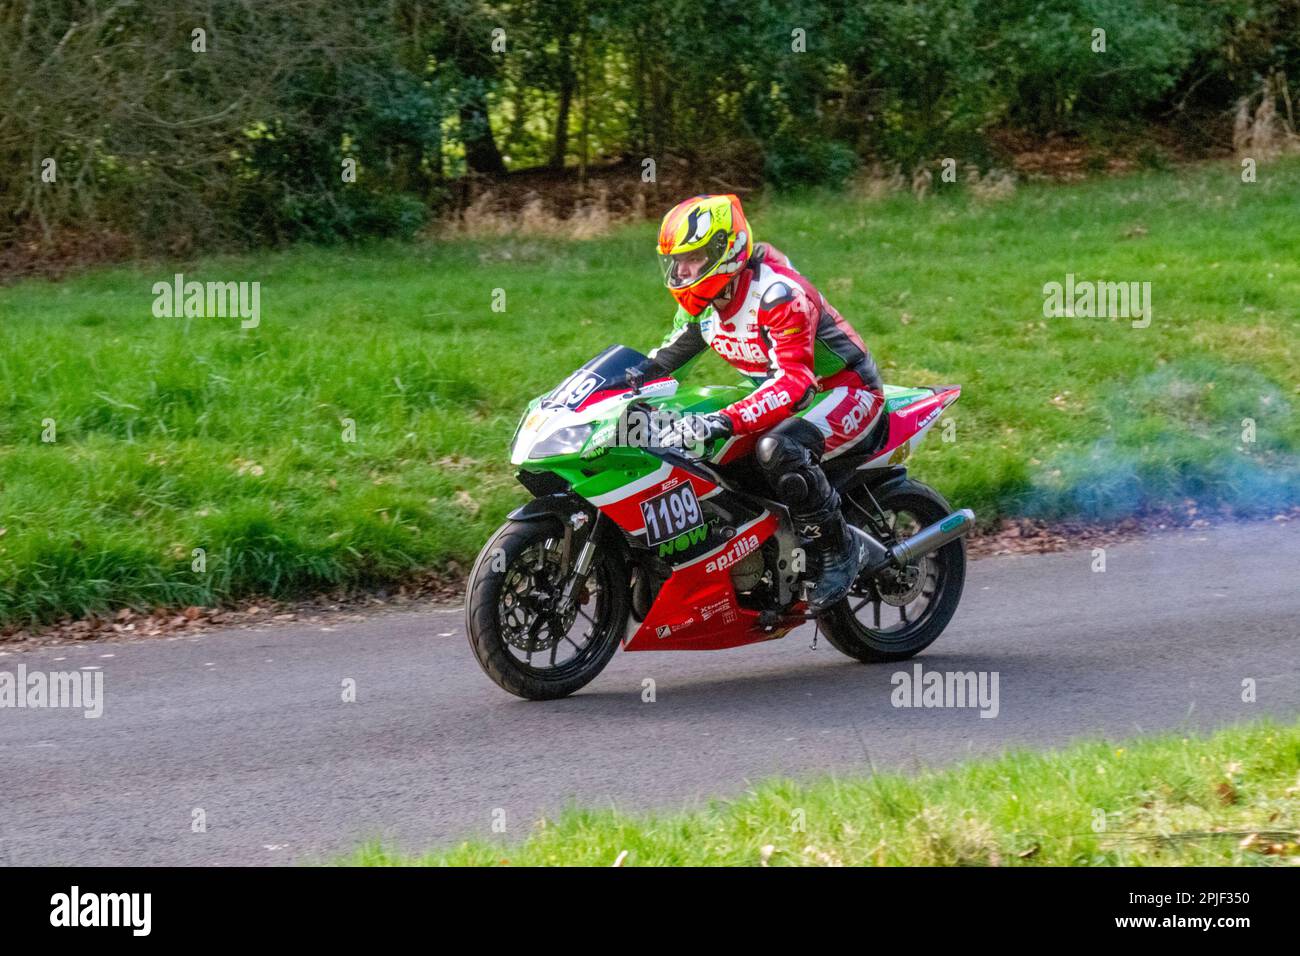 Bike 1199 2007 APRILIA  RS125, powered by a Rotax single cylinder 124.8 cc two-stroke engine ridden by Stuart Caddick at the 2023  HOGHTON TOWER SPRINT COURSE 1/8th timed mile drive. Stock Photo